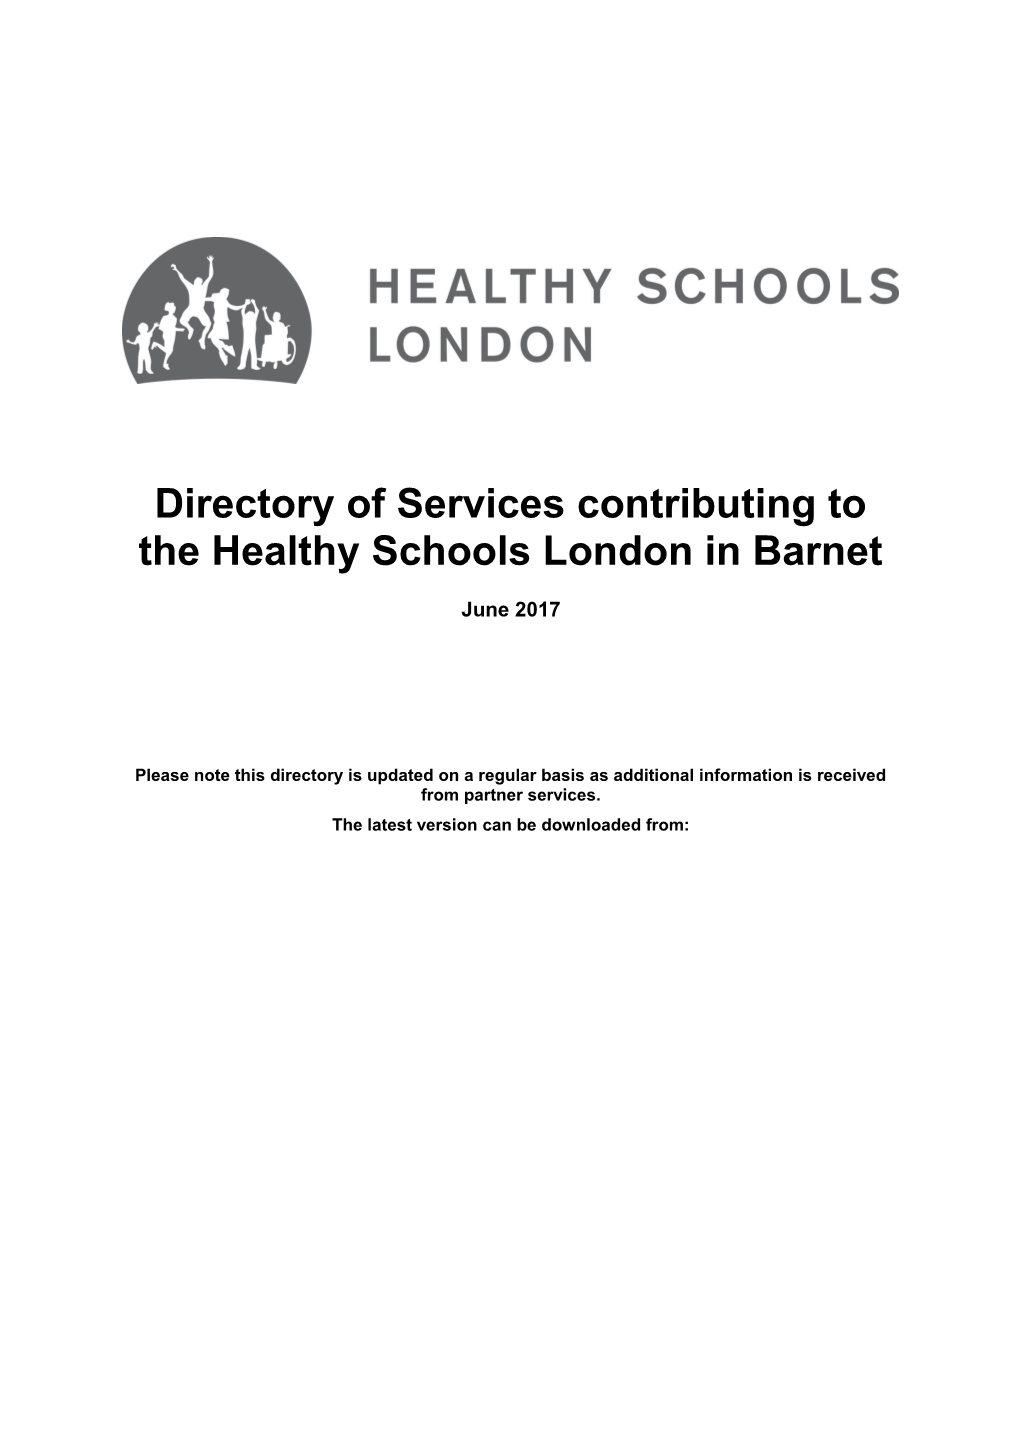 Directory of Services Contributing to the Healthy Schools London in Barnet